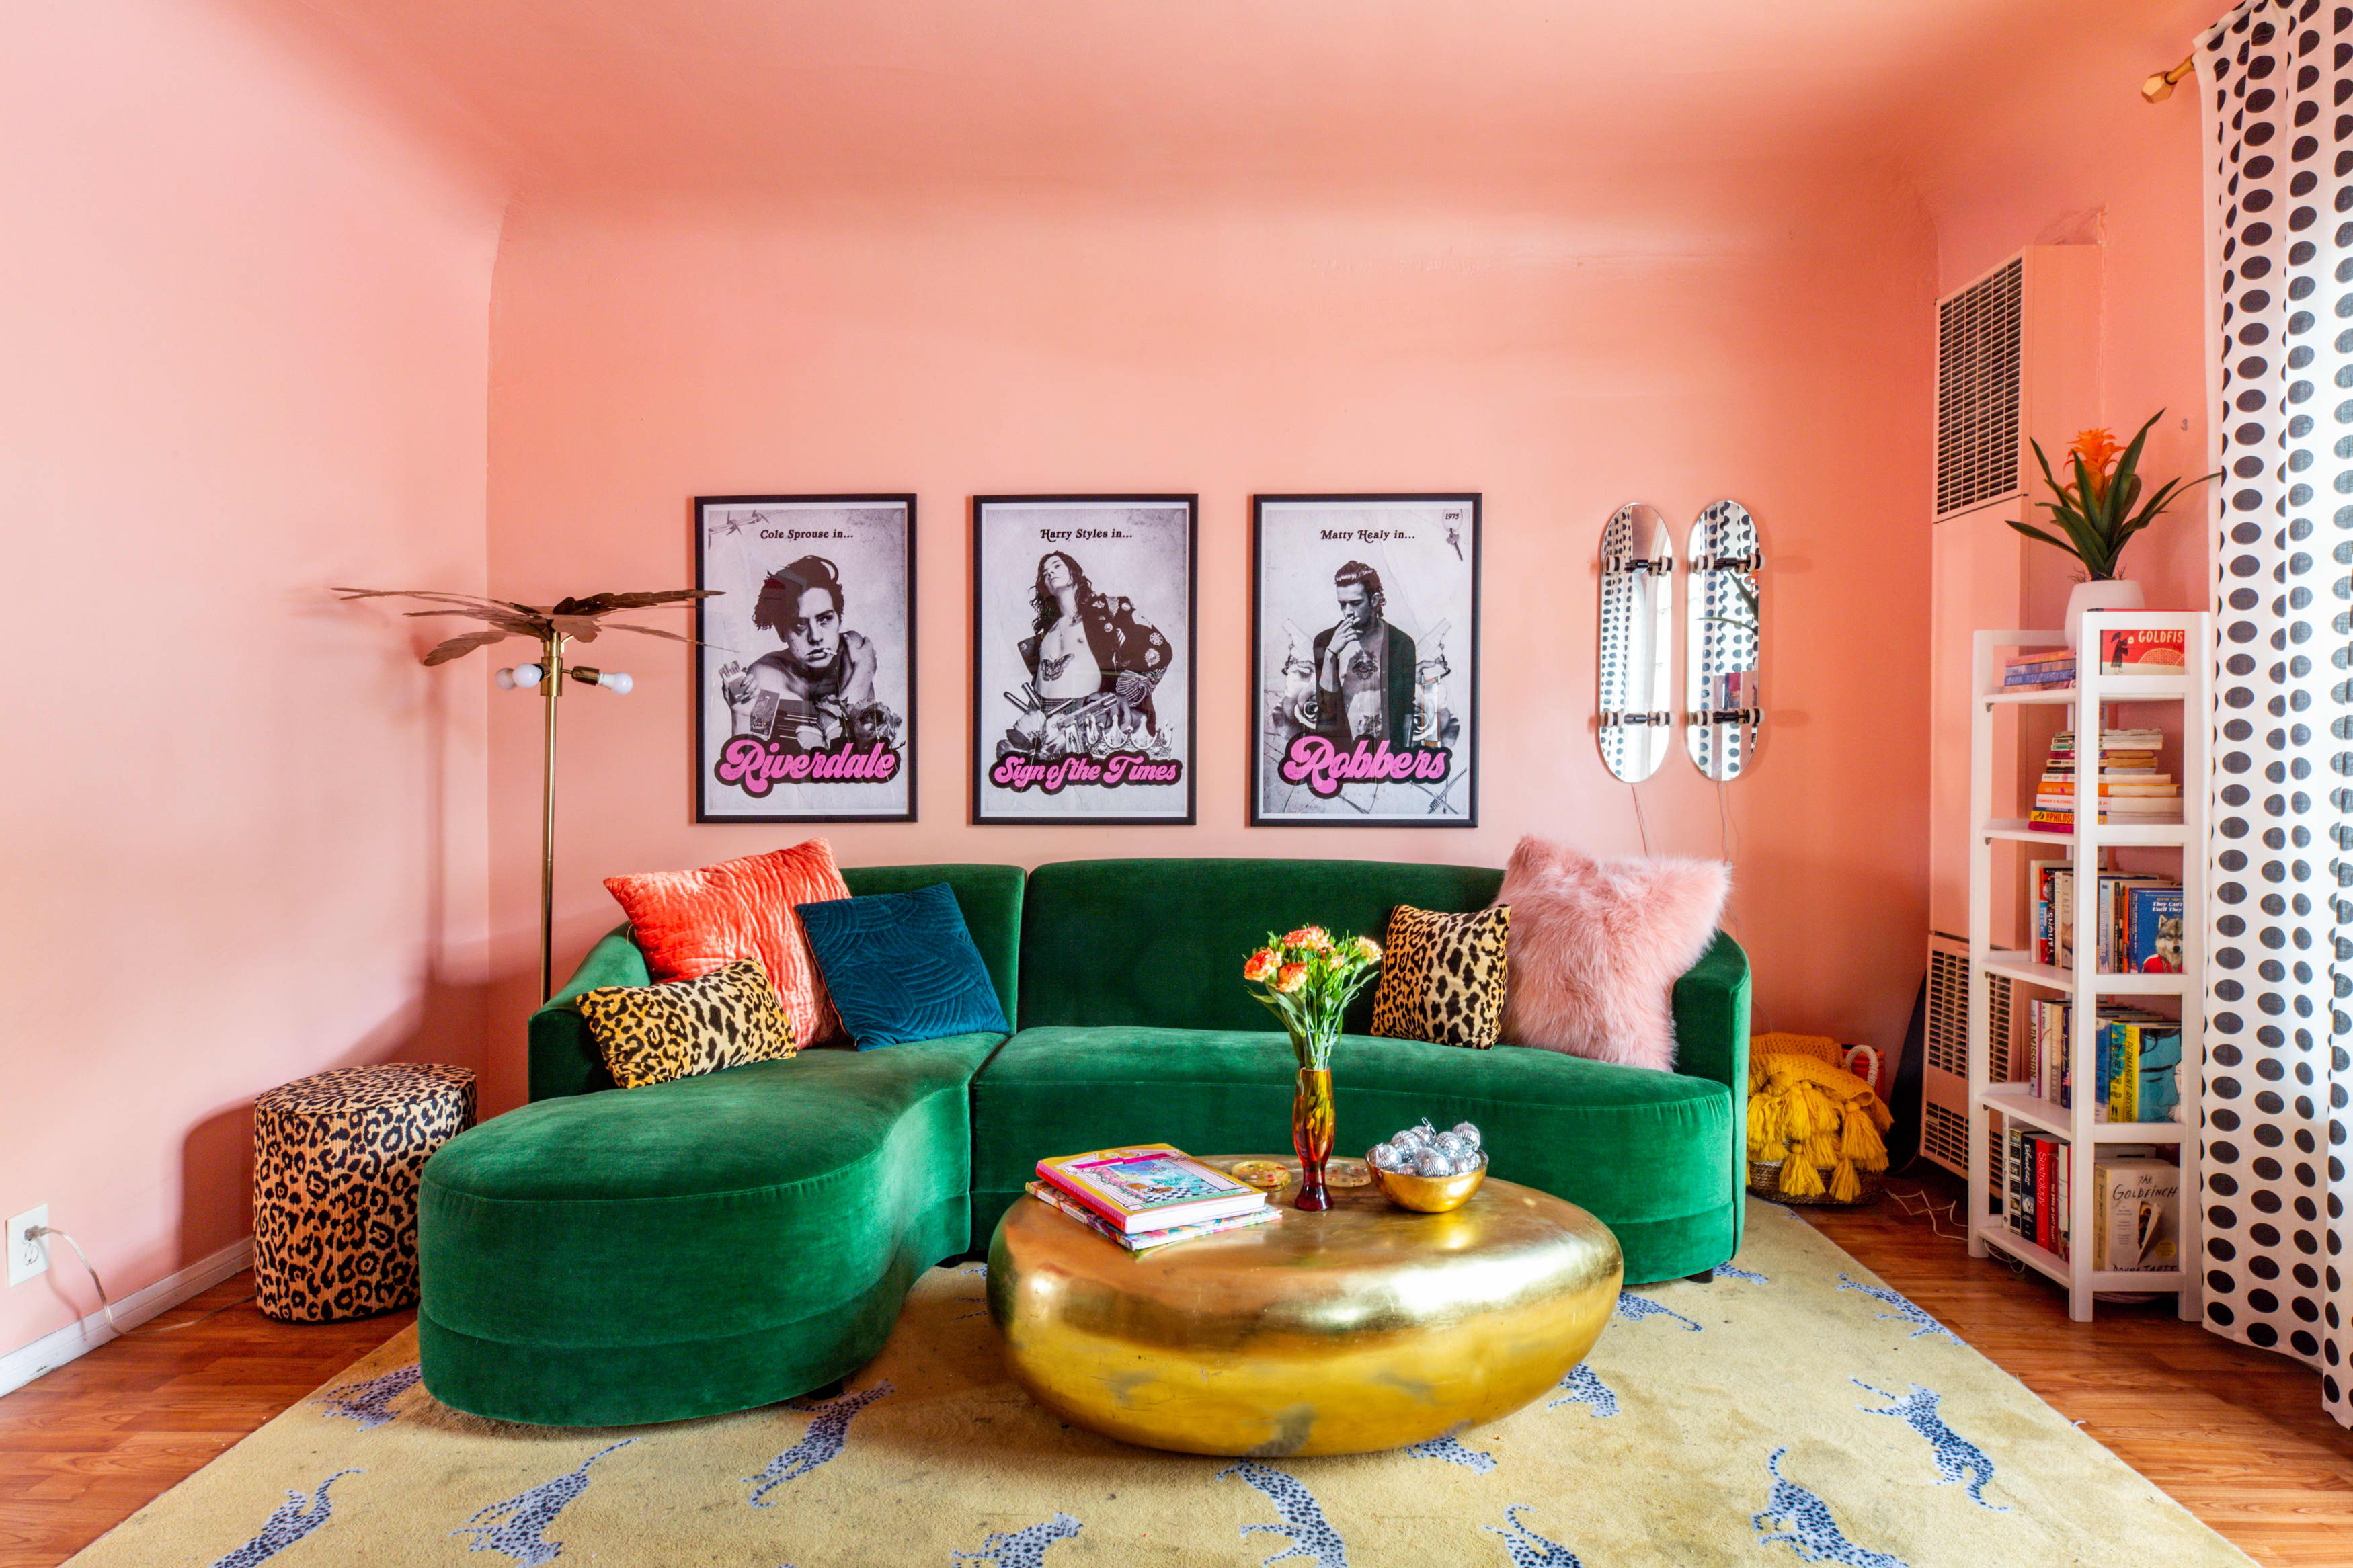 12 Funky Home Decorating Ideas That Will Make You Gasp